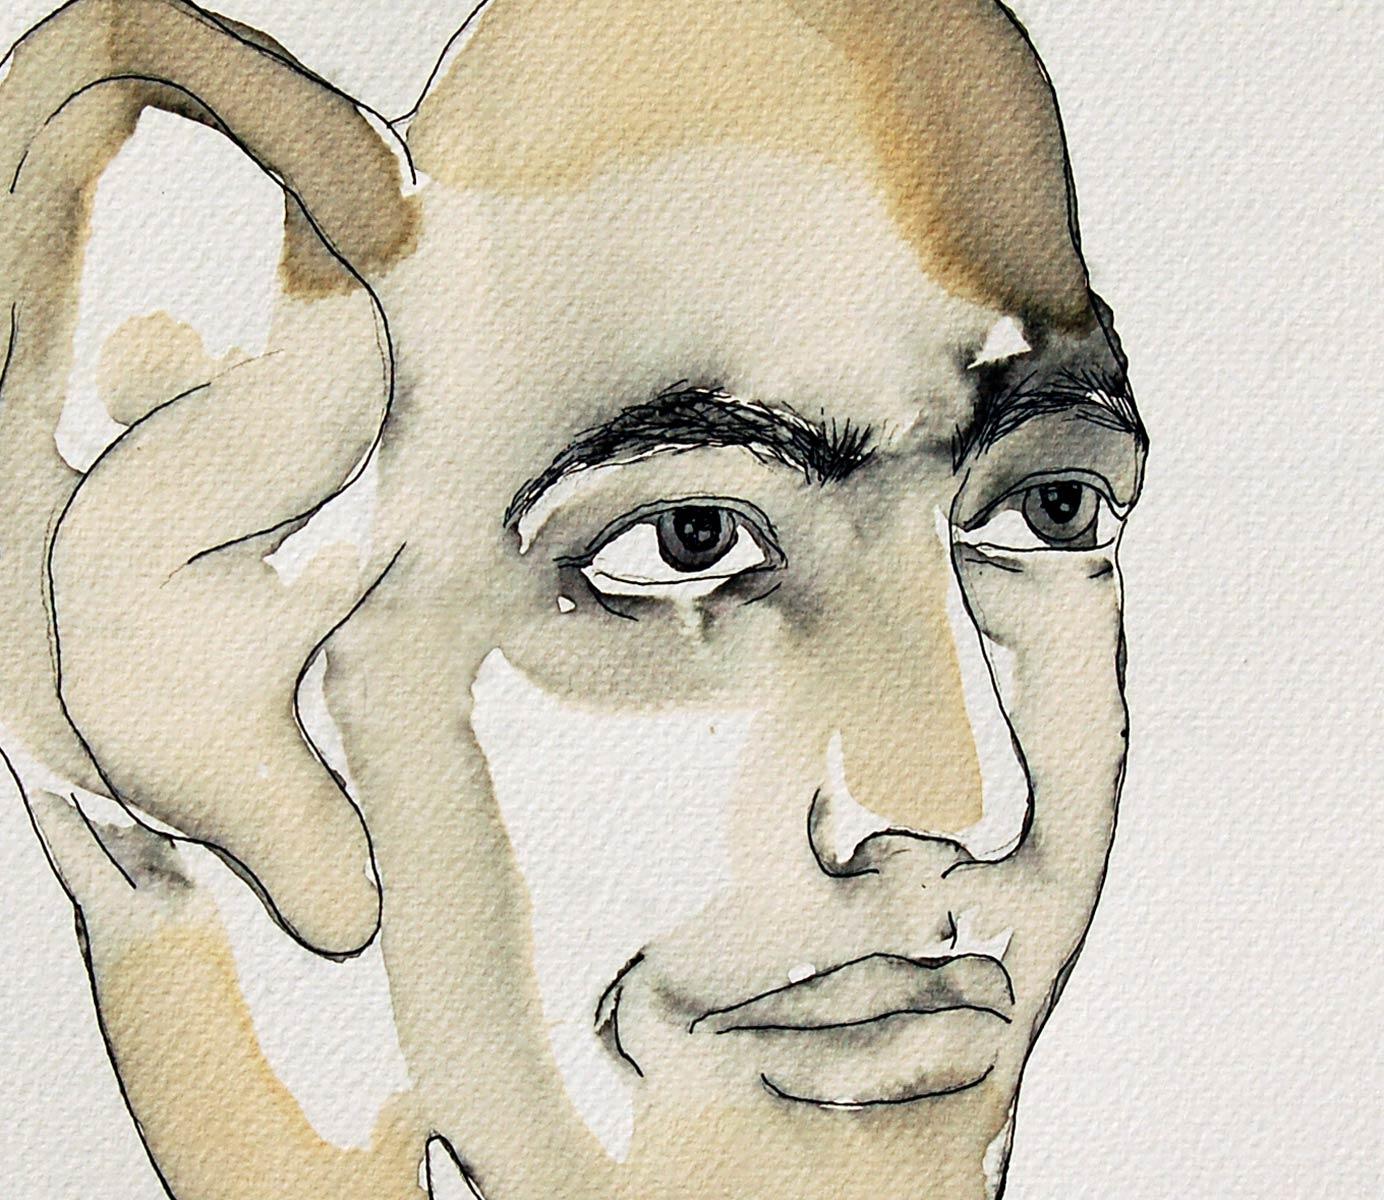 Man with big Ear, Figurative, Ink and Tea Wash on paper by Contemporary Artist - Beige Figurative Art by Prasanta Sahu